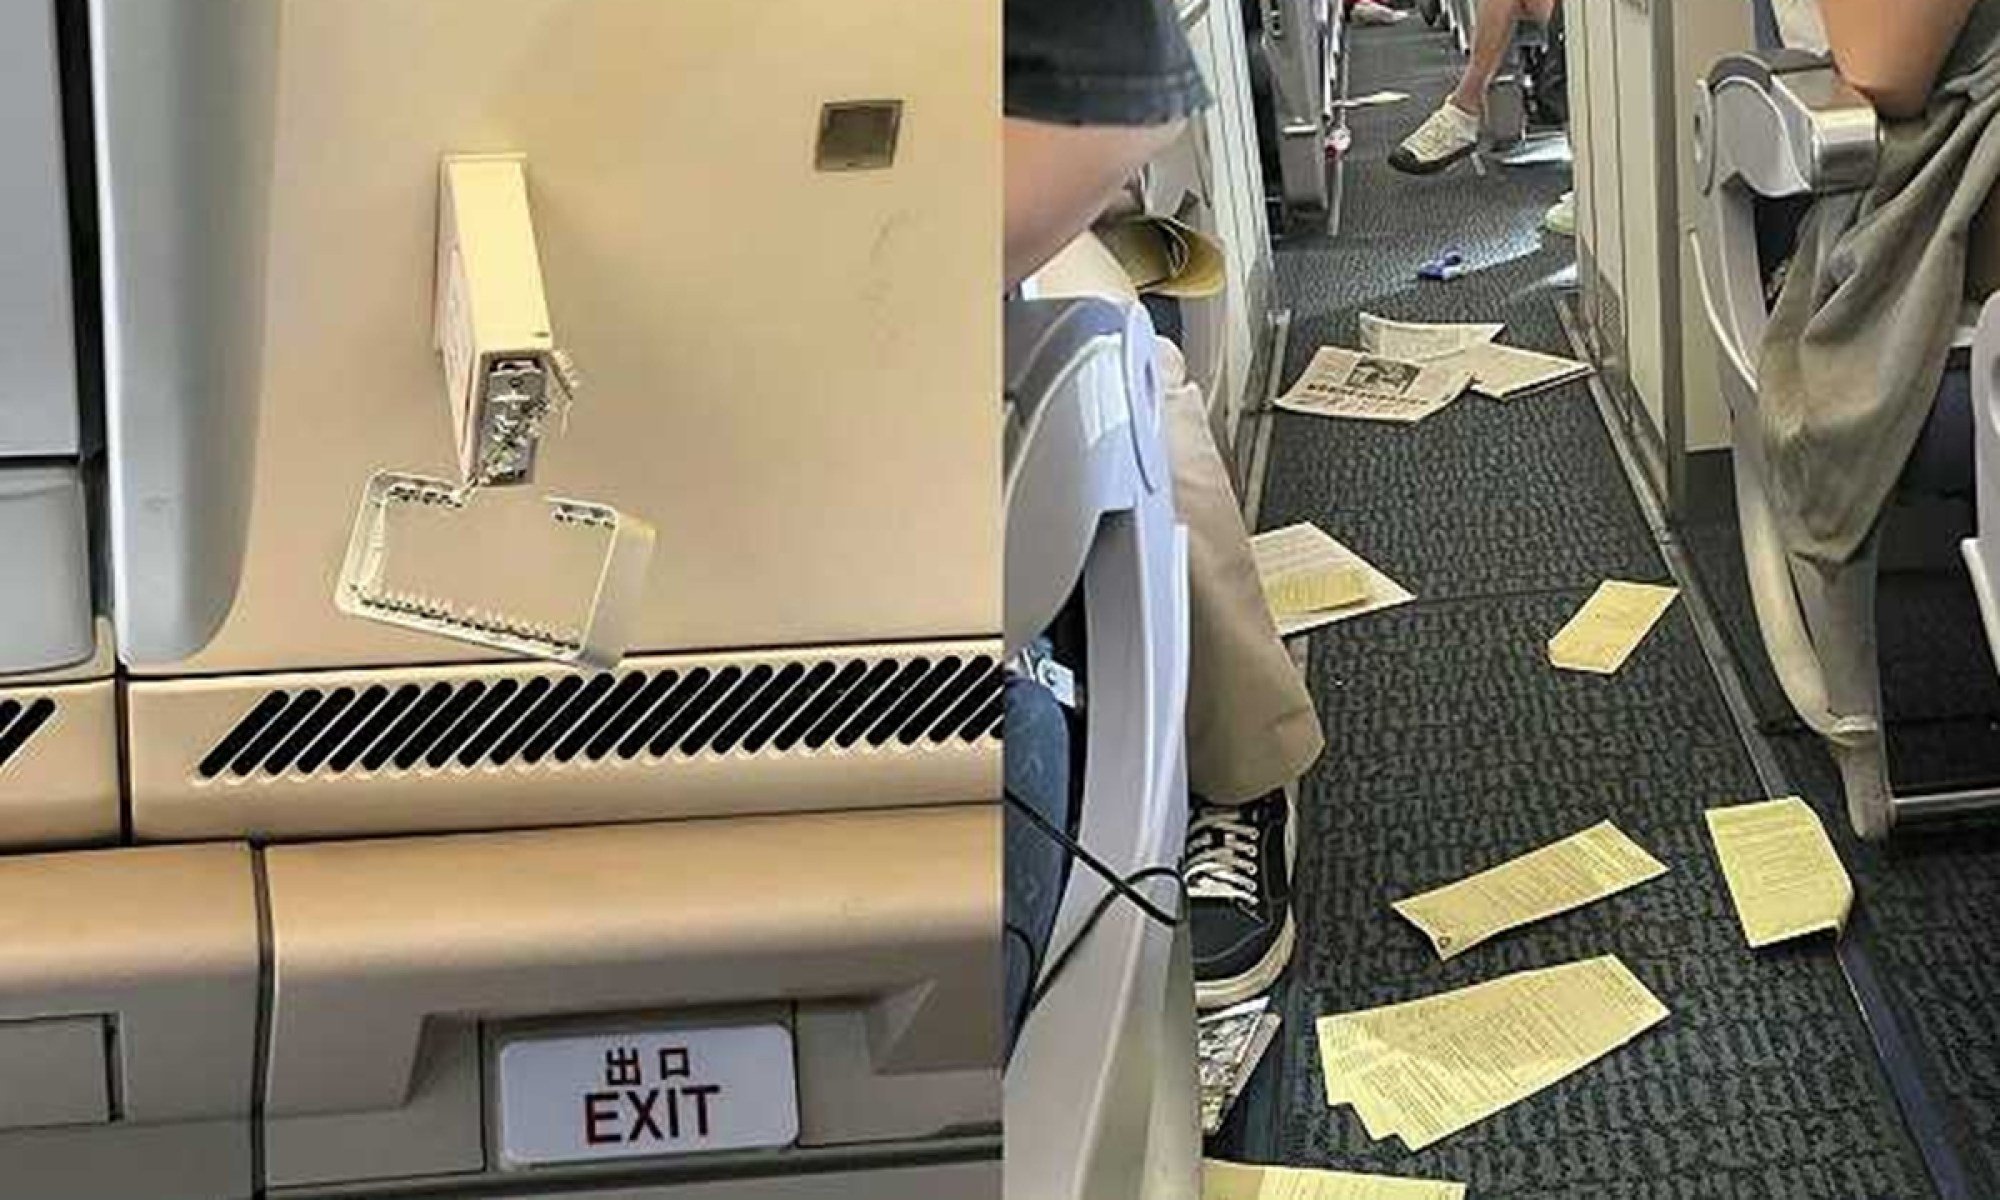 The frightening incident left the plane’s aisles strewn with items and damaged a hanging exit sign. Photo: Weibo